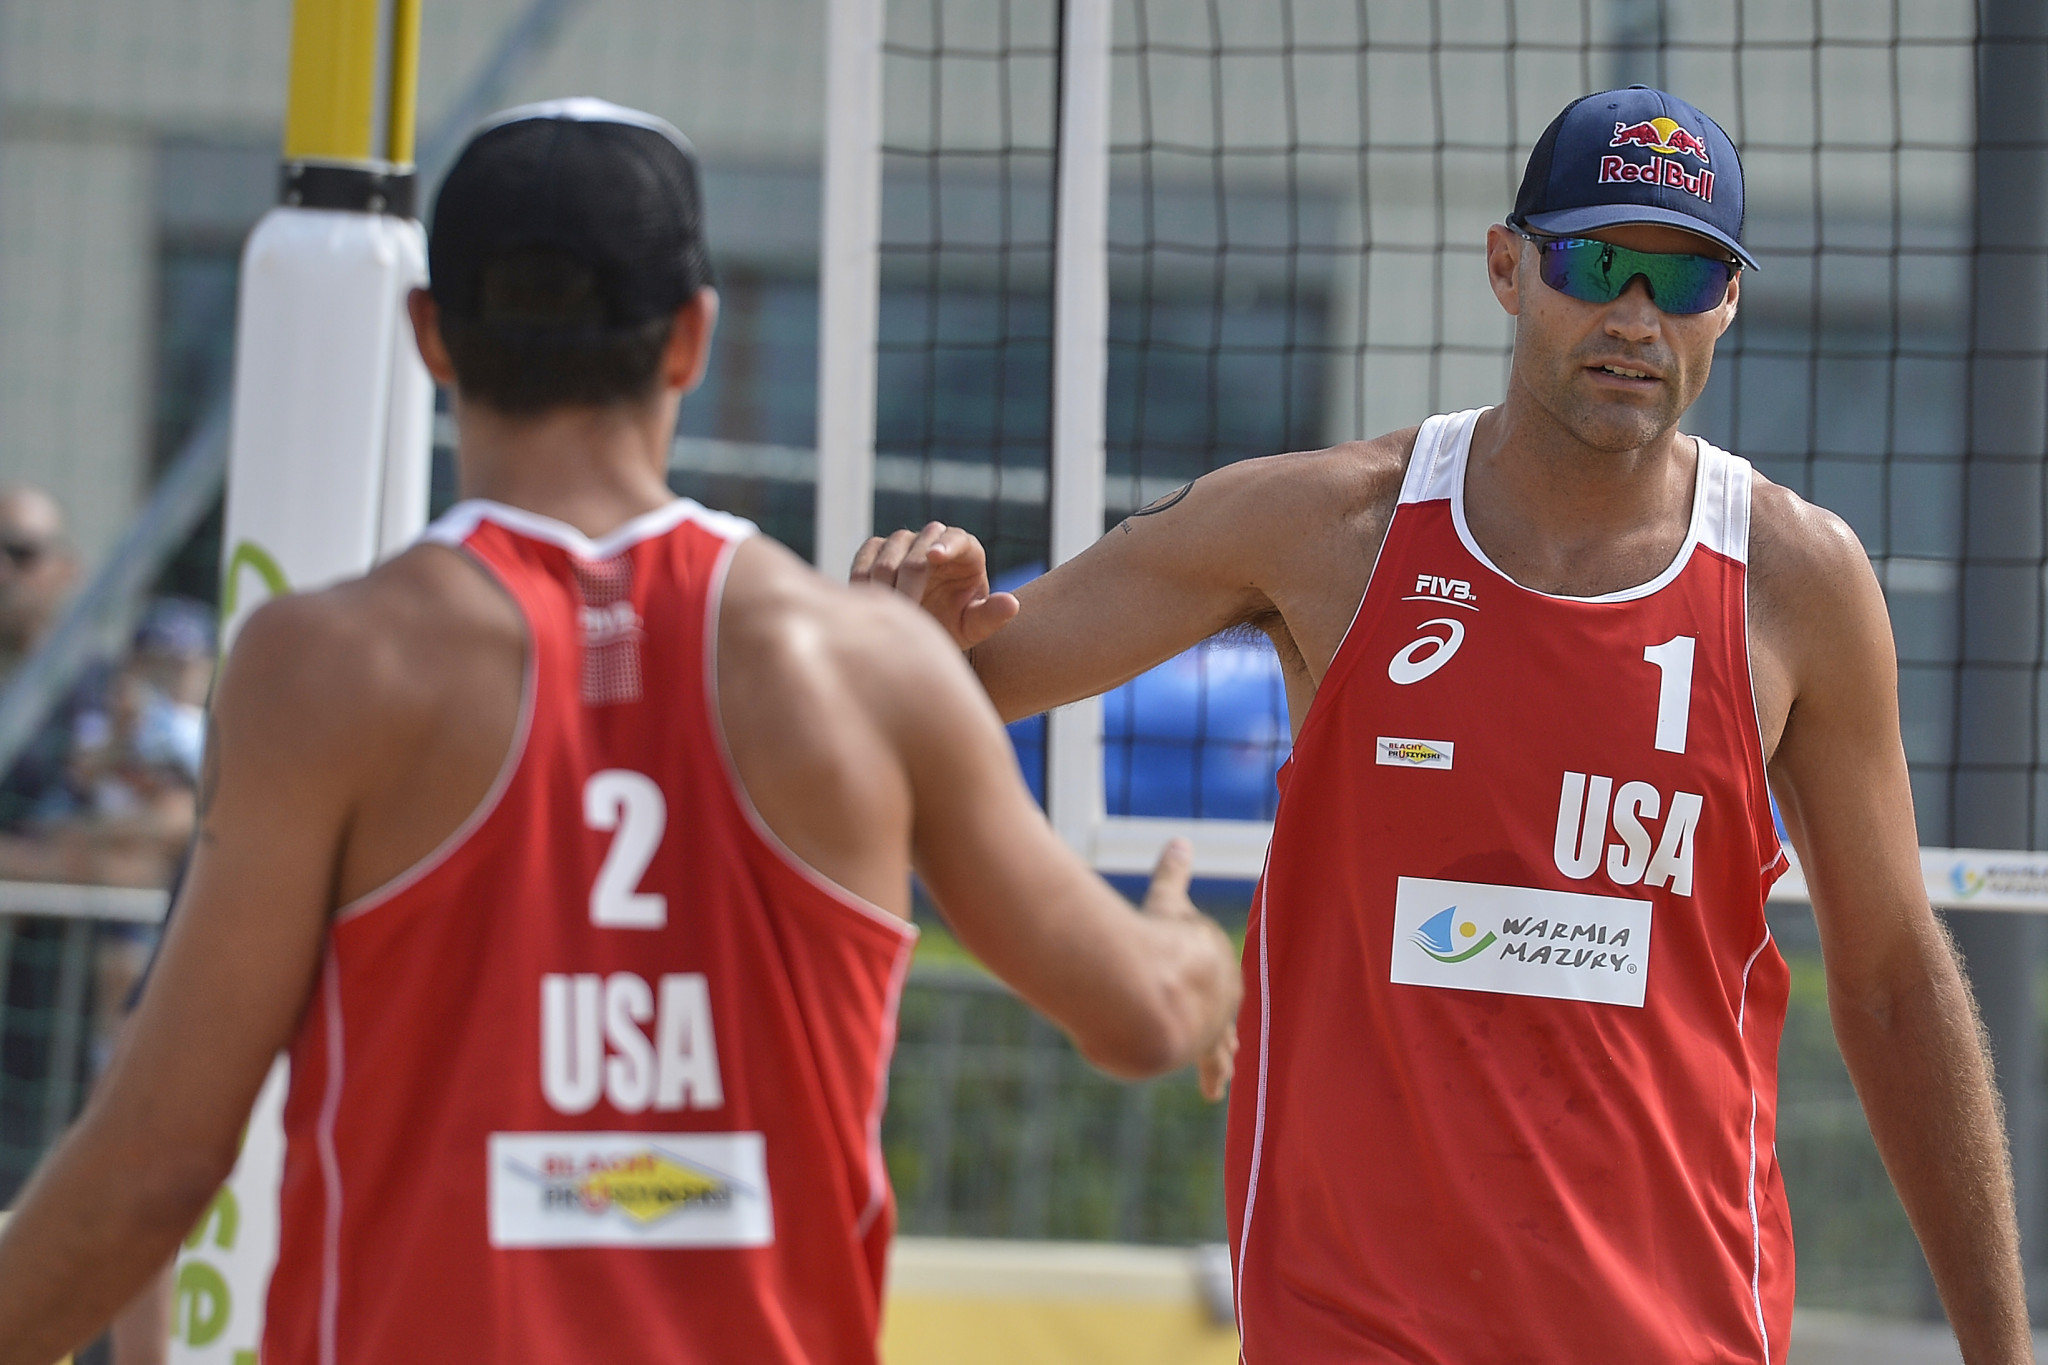 Nick Lucena and Phil Dalhausser will look to add to their Fort Lauderdale win in Doha ©Getty Images